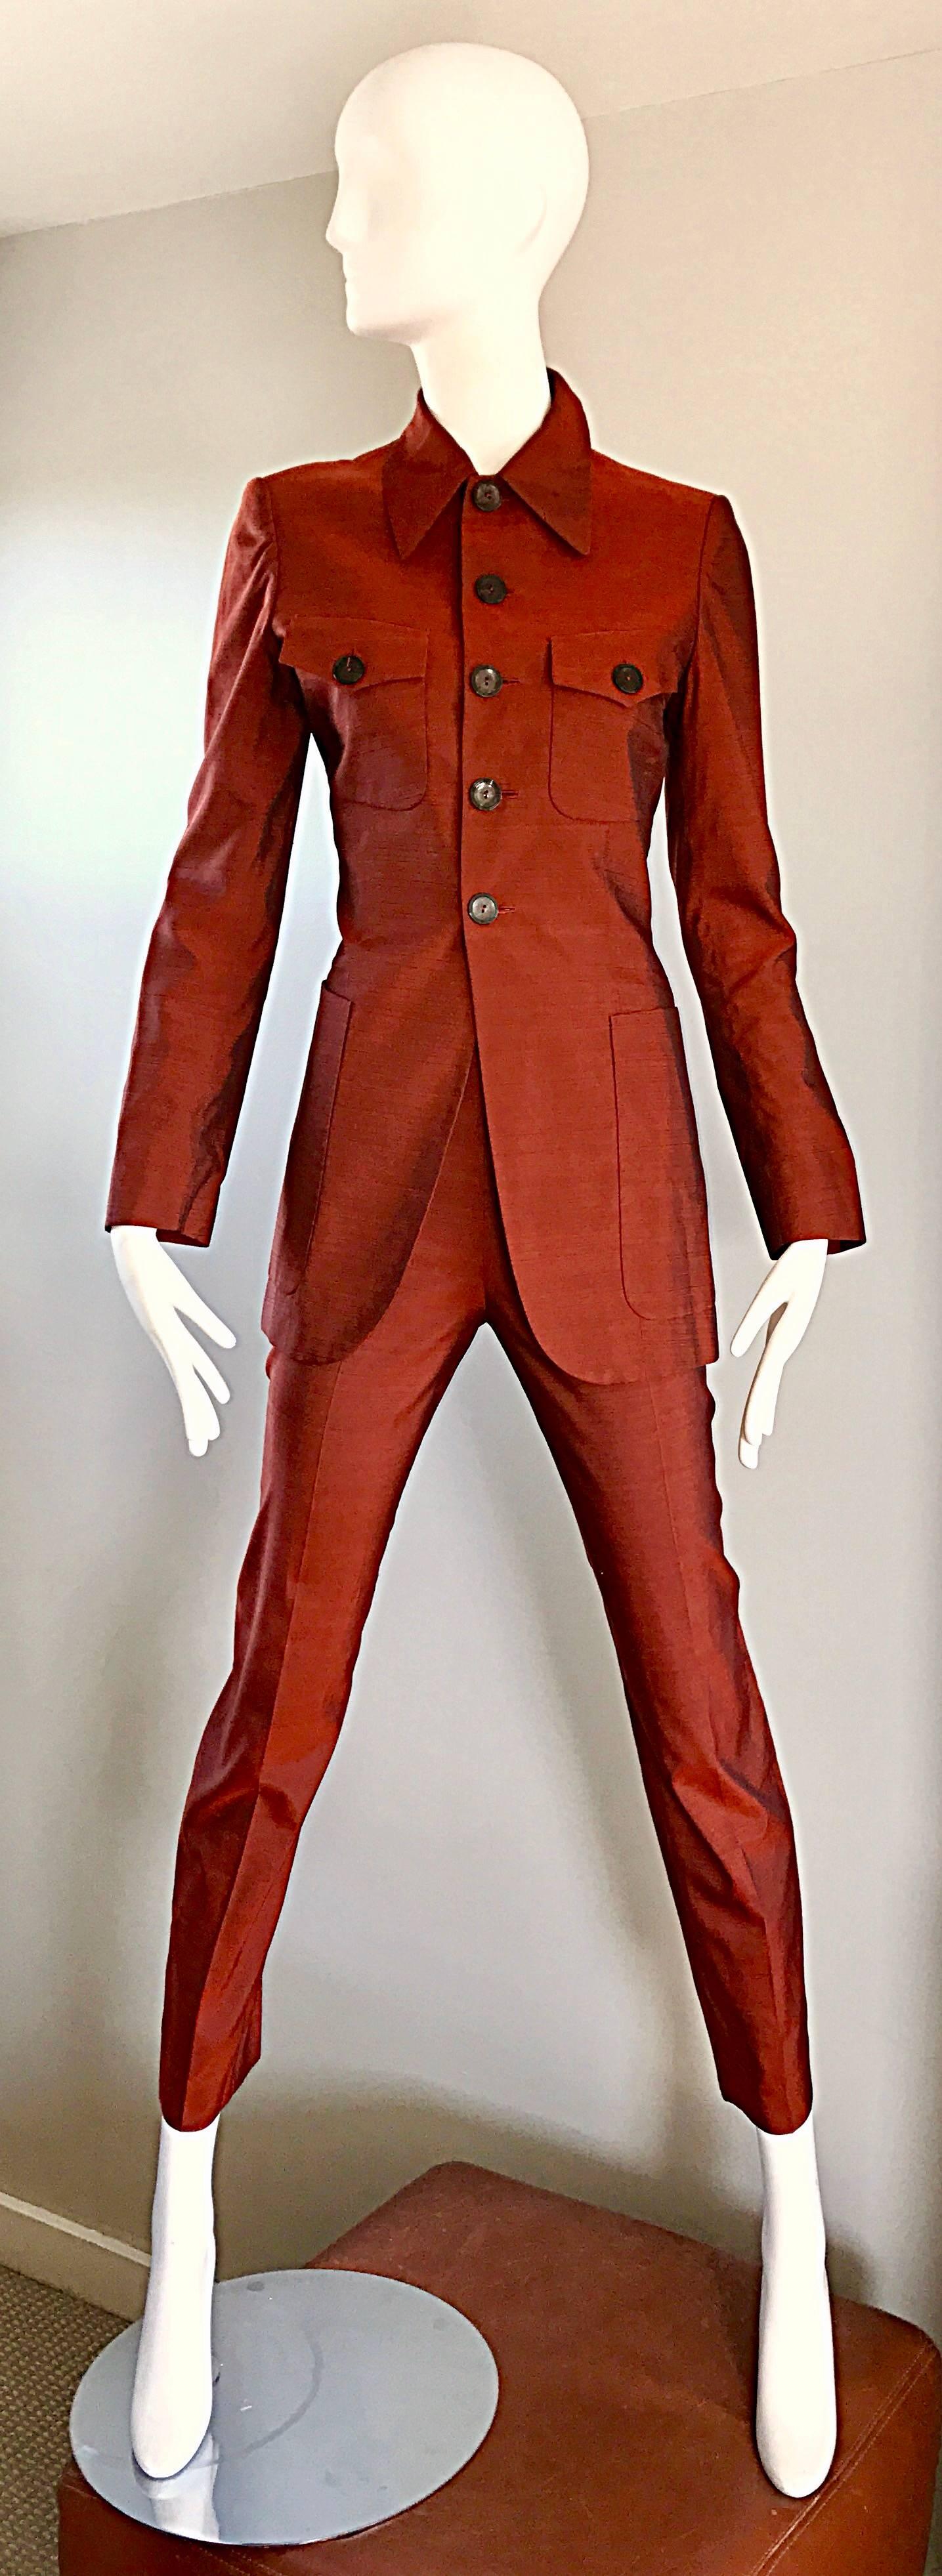 Fabulous vintage early 90s JEAN PAUL GAULTIER rust / burnt orange colored silk shantung cigarette suit! Features a stylish long blazer, with buttons up the bodice. Four functional pockets of the front of the jacket. High waisted skinny cigarette